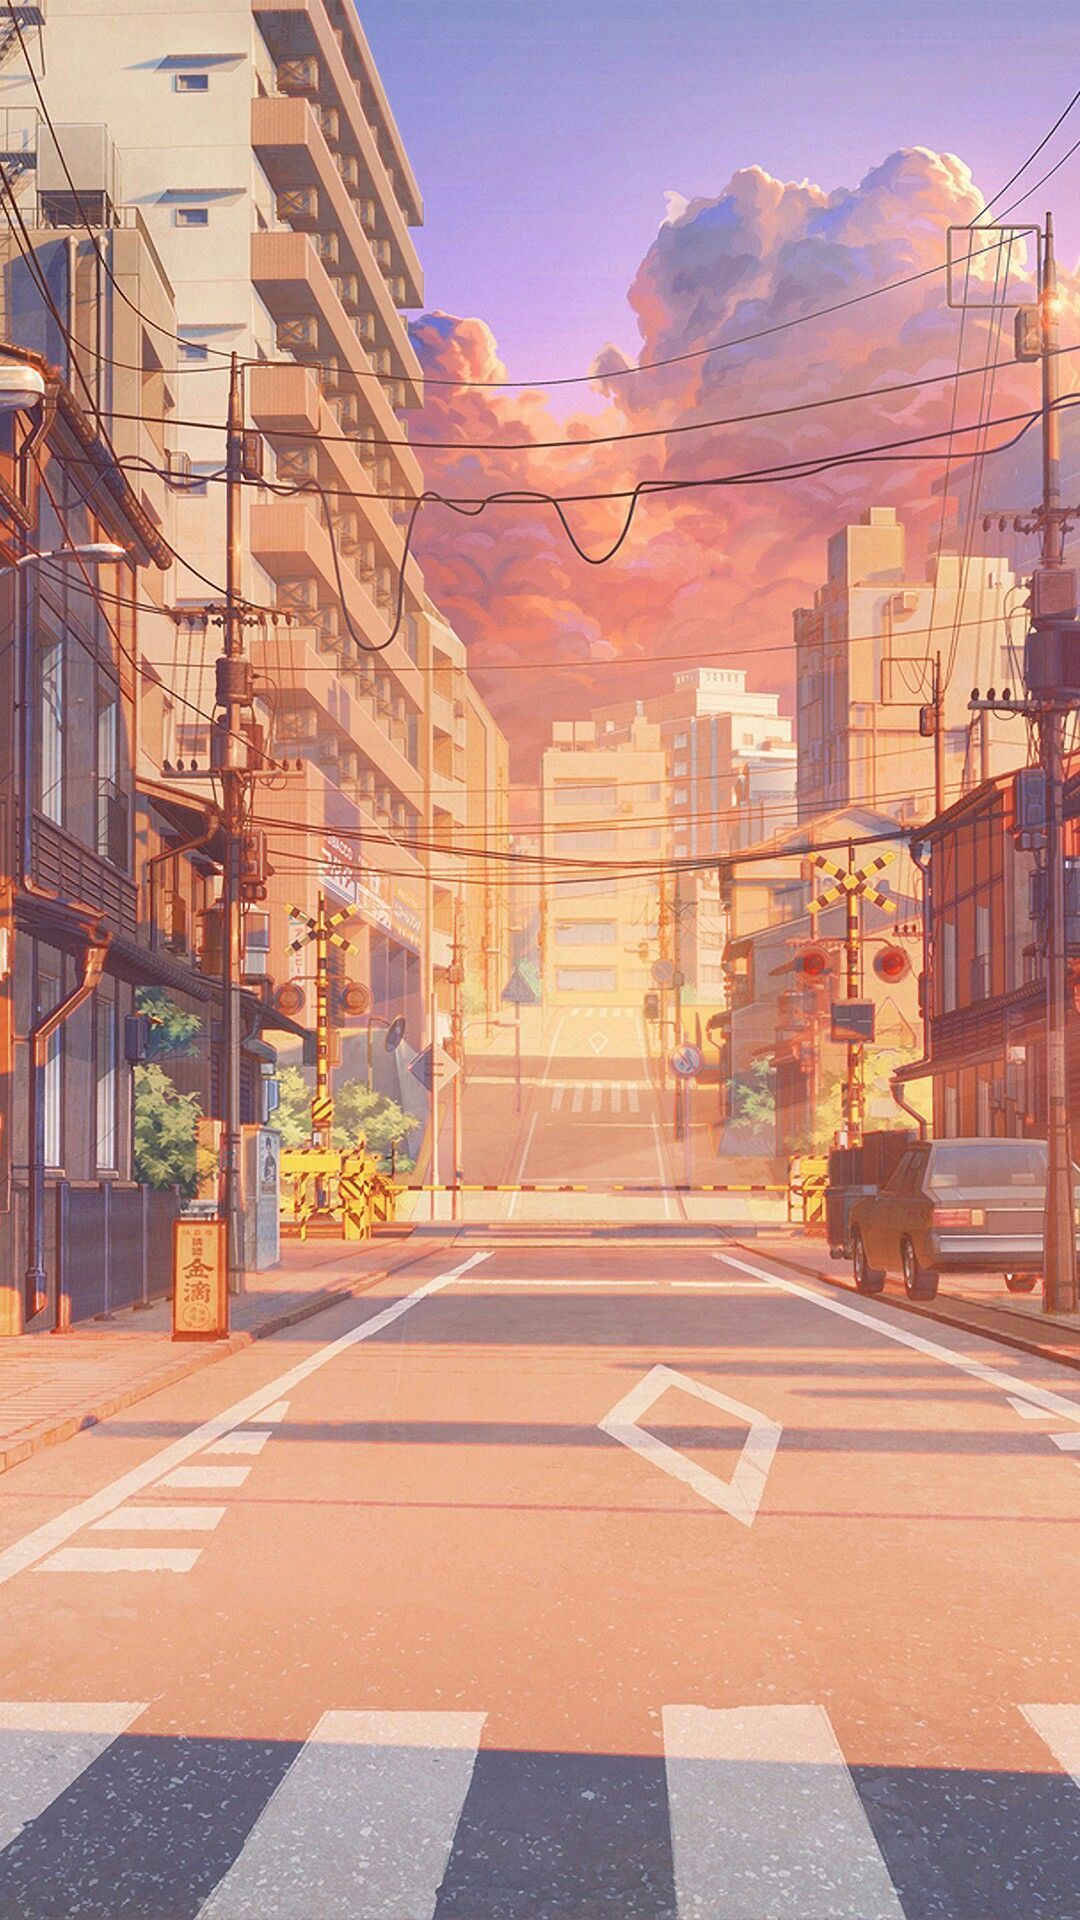 A street with buildings and cars on it - Anime sunset, anime, anime city, calming, Japan, anime landscape, phone, road, HD